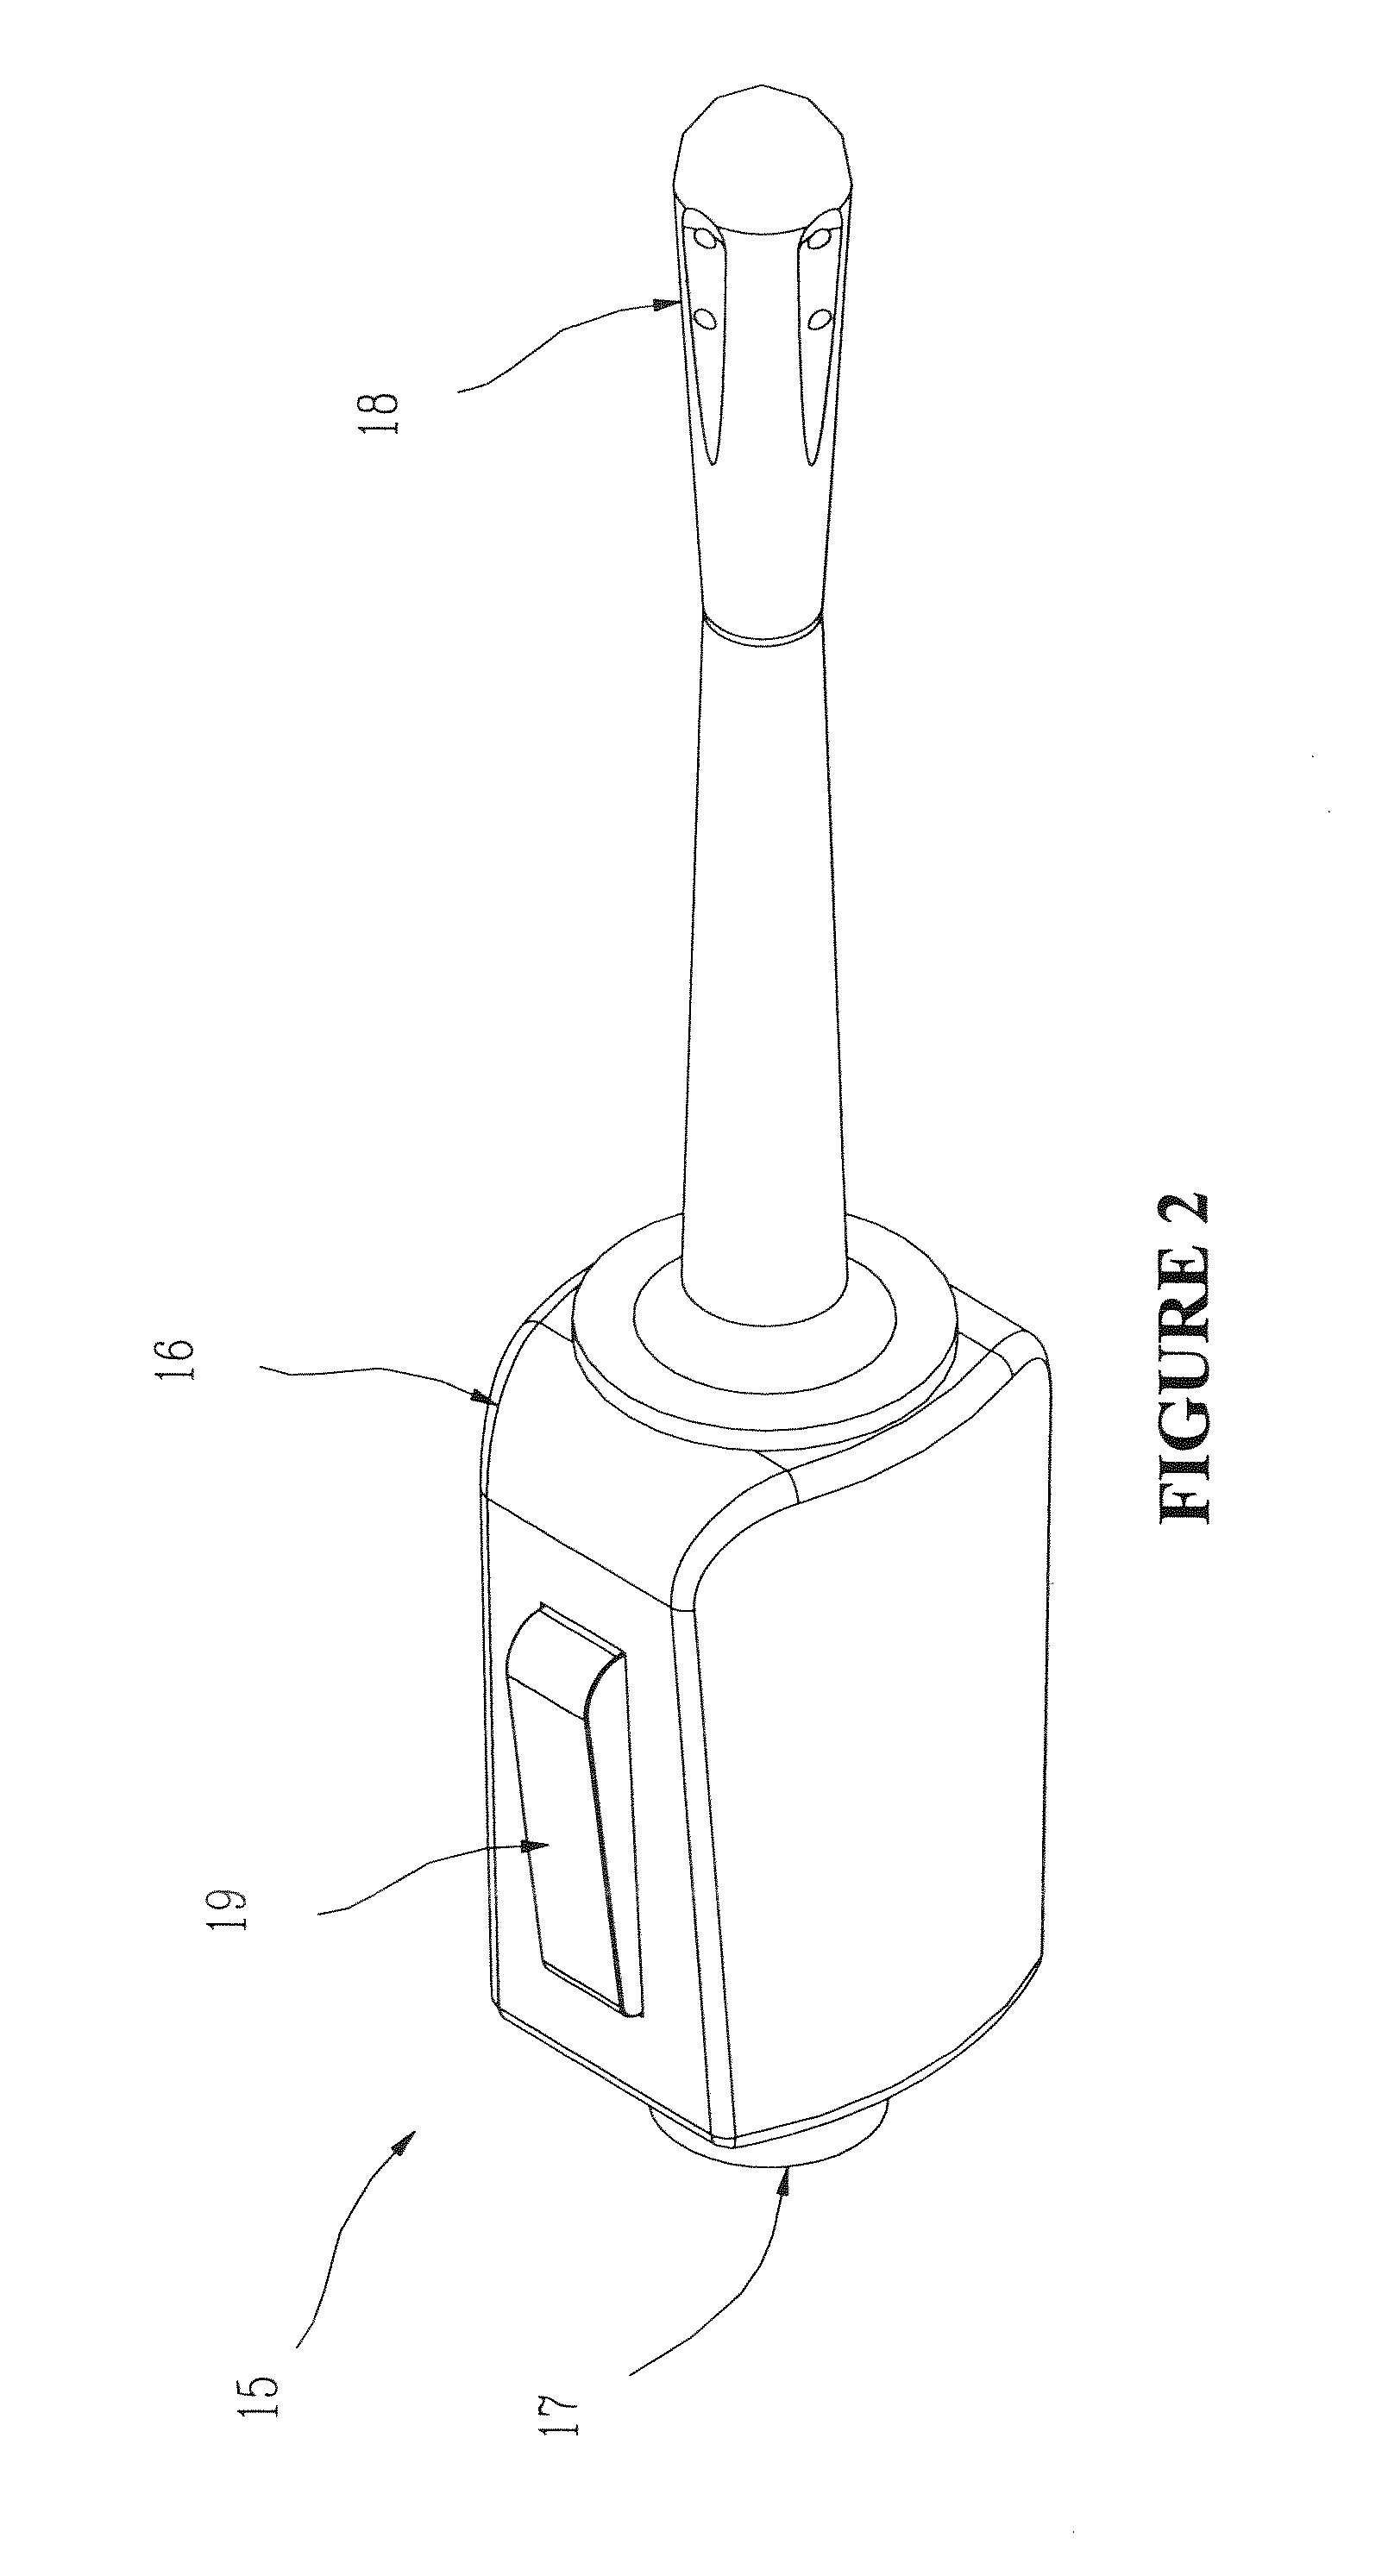 Direction control valve for shower irrigating applications